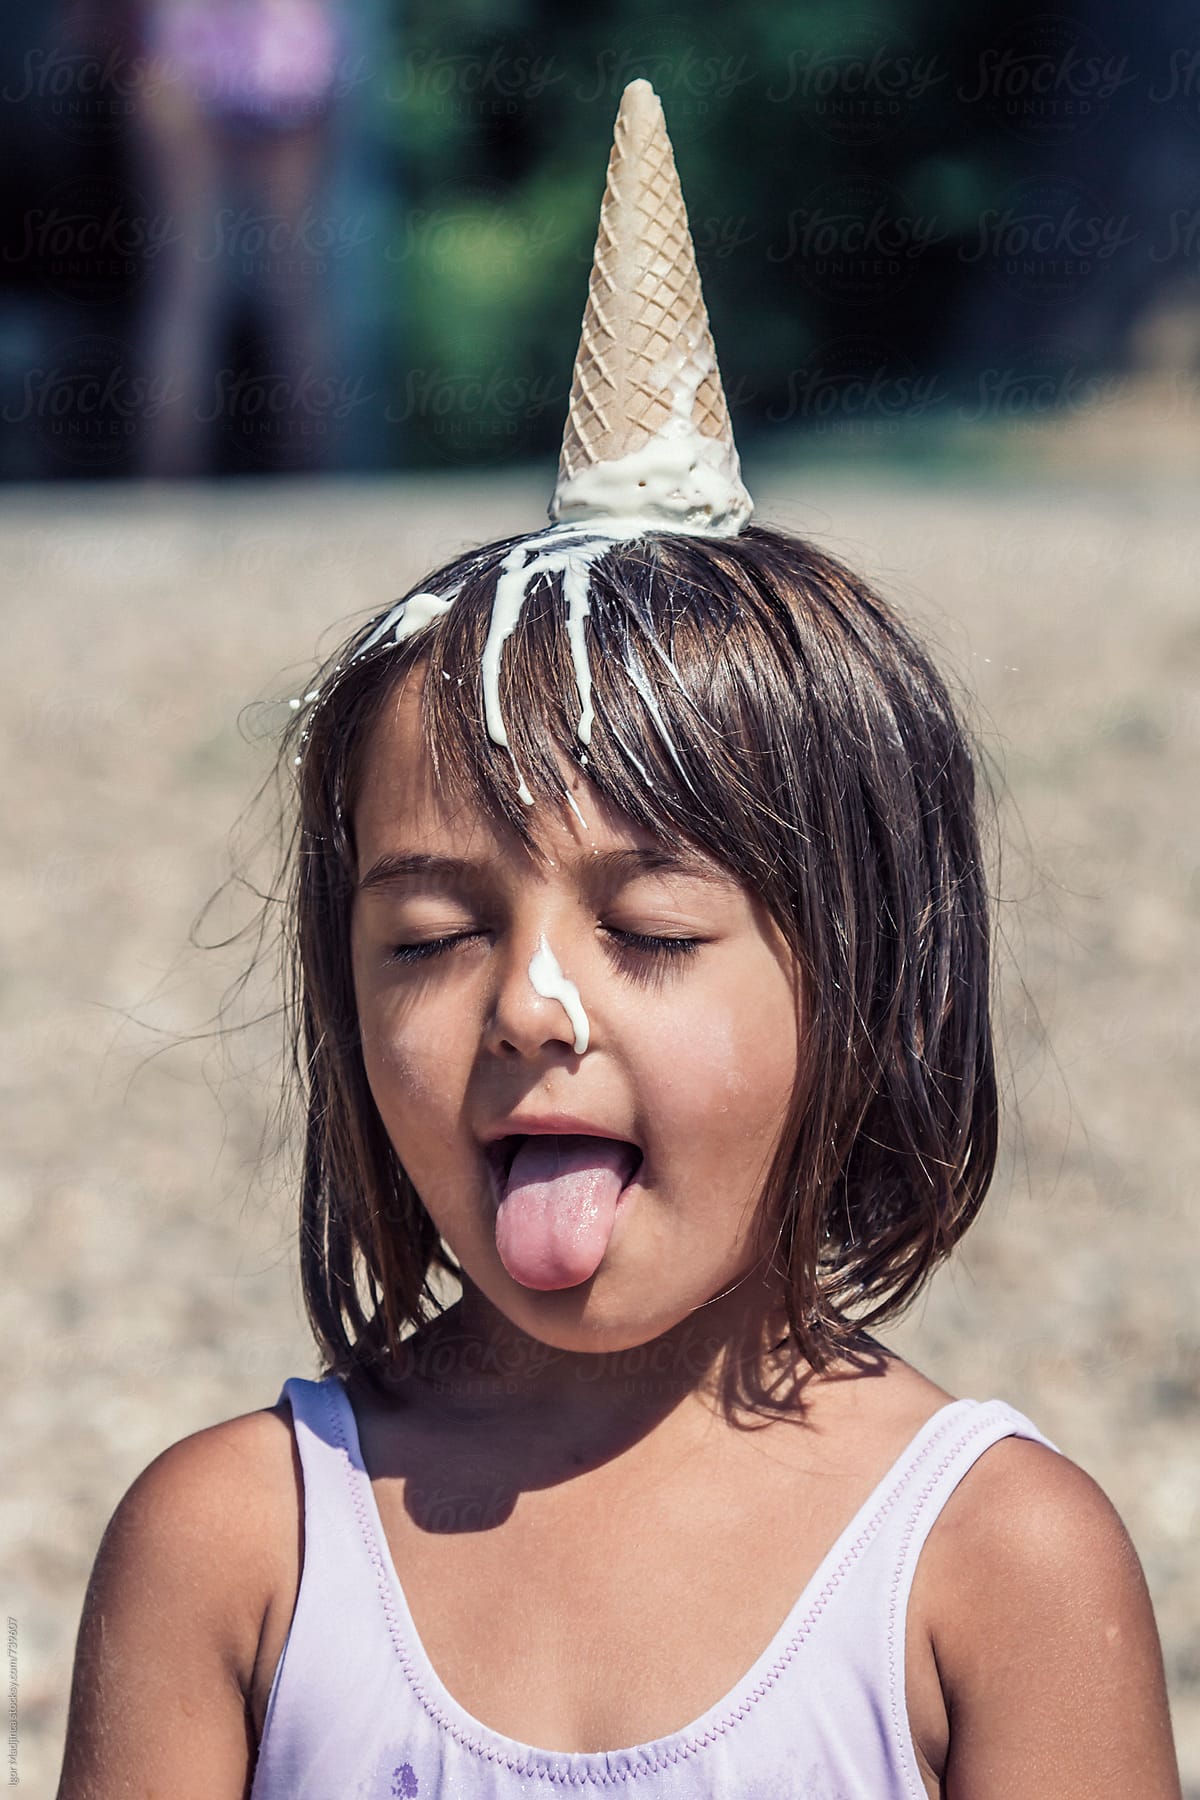 A New Way Of Eating Ice Creamgirl With Melted Ice Cream On Her Head By Stocksy Contributor